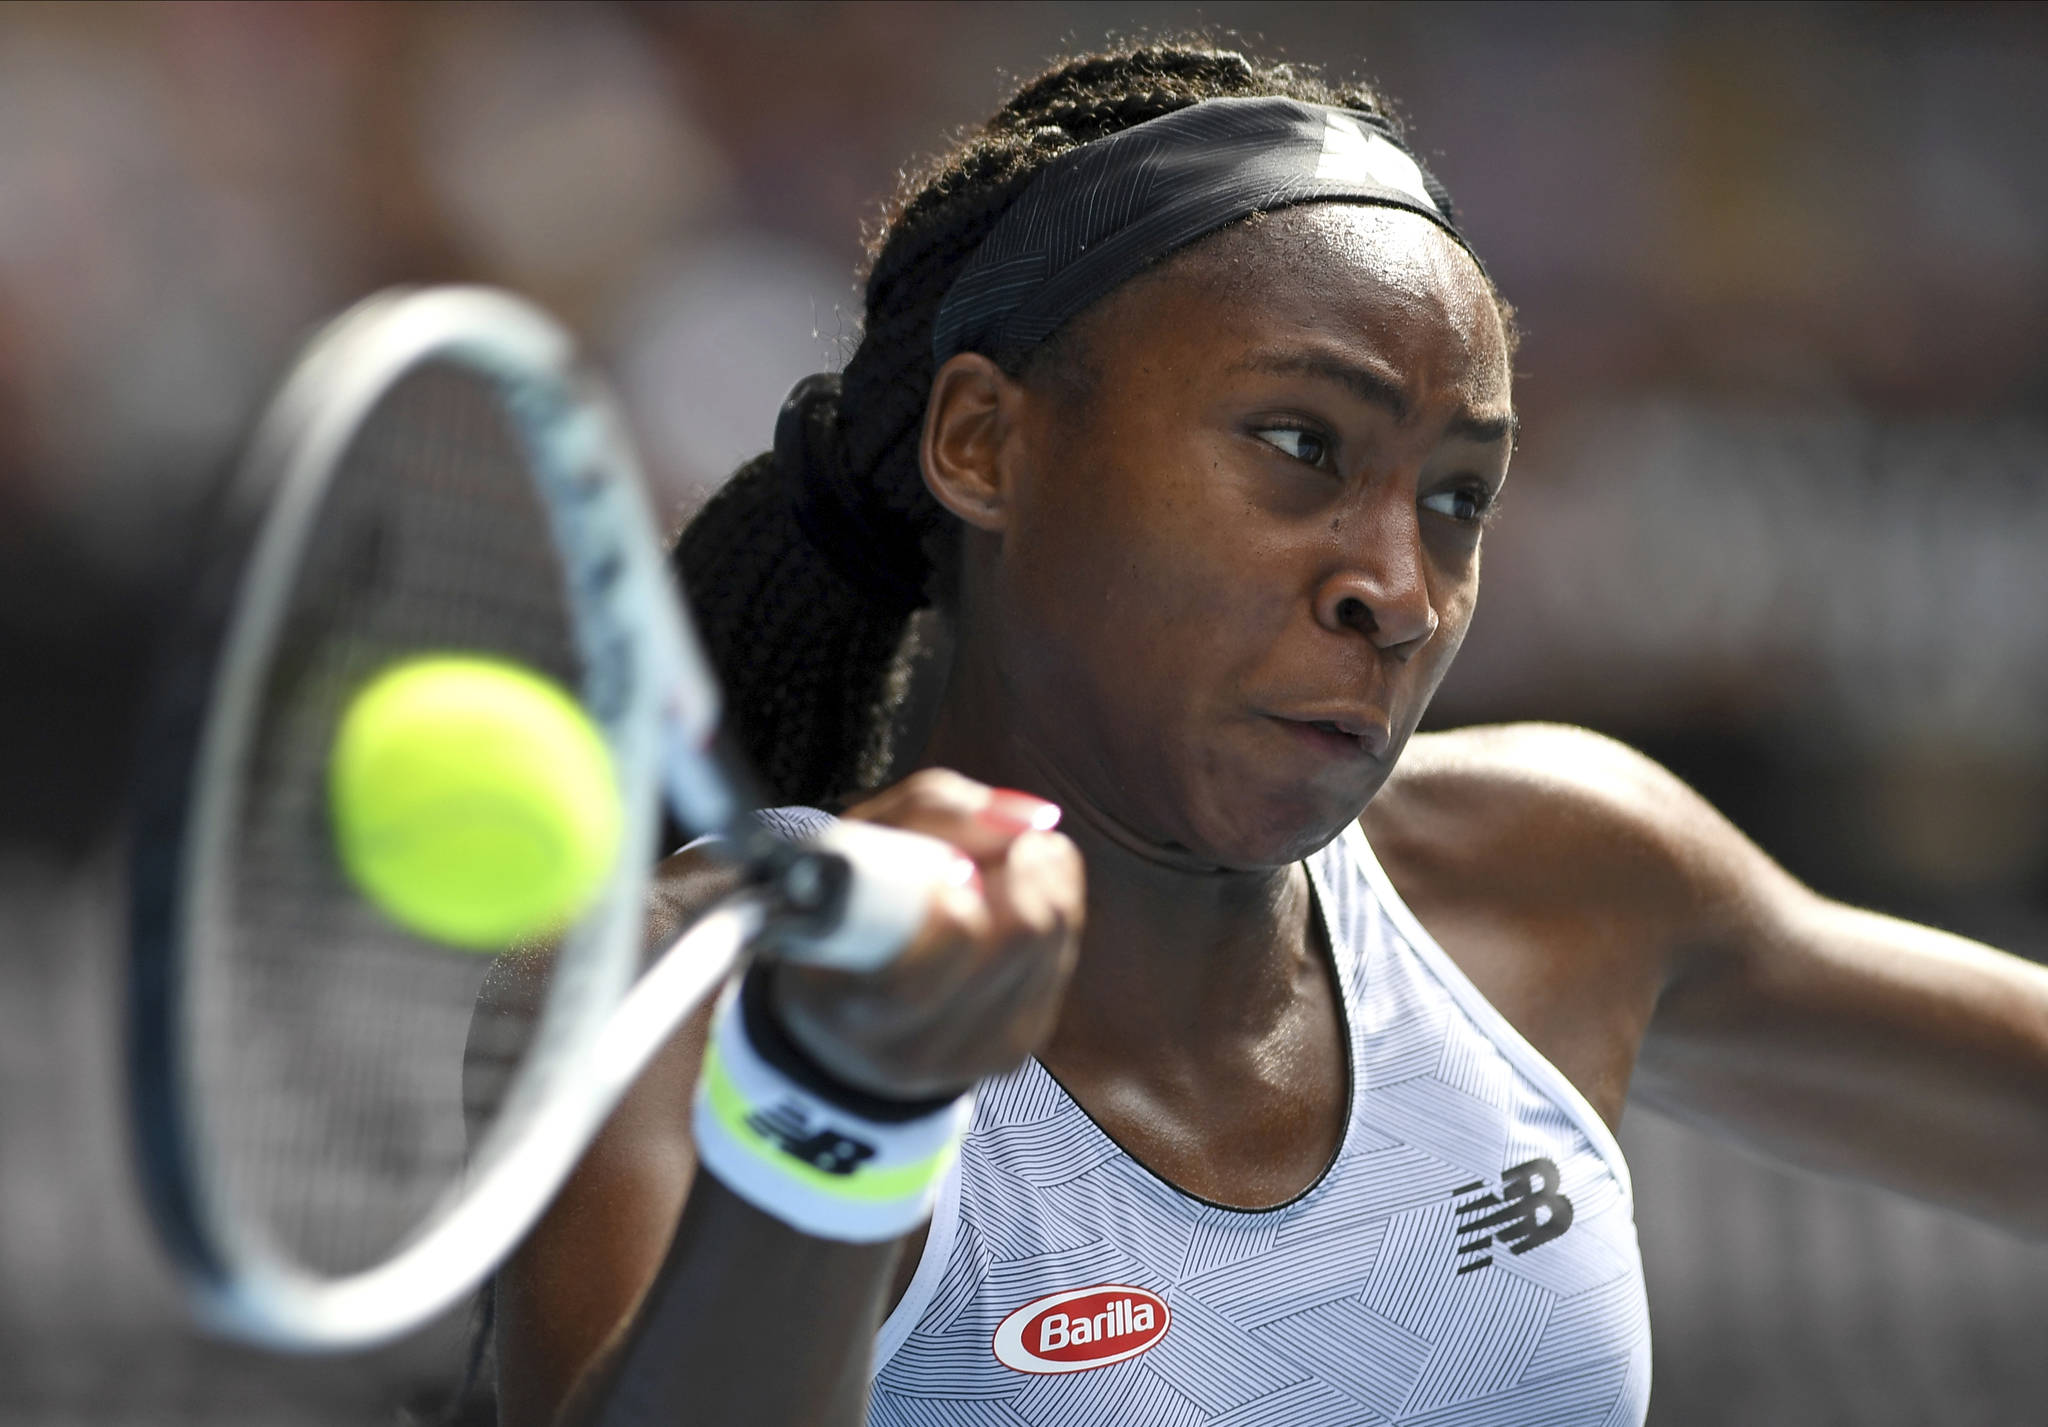 Coco Gauff of the U.S. makes a forehand return to compatriot Sofia Kenin during their fourth-round singles match at the Australian Open on Sunday. (AP Photo/Andy Brownbill)